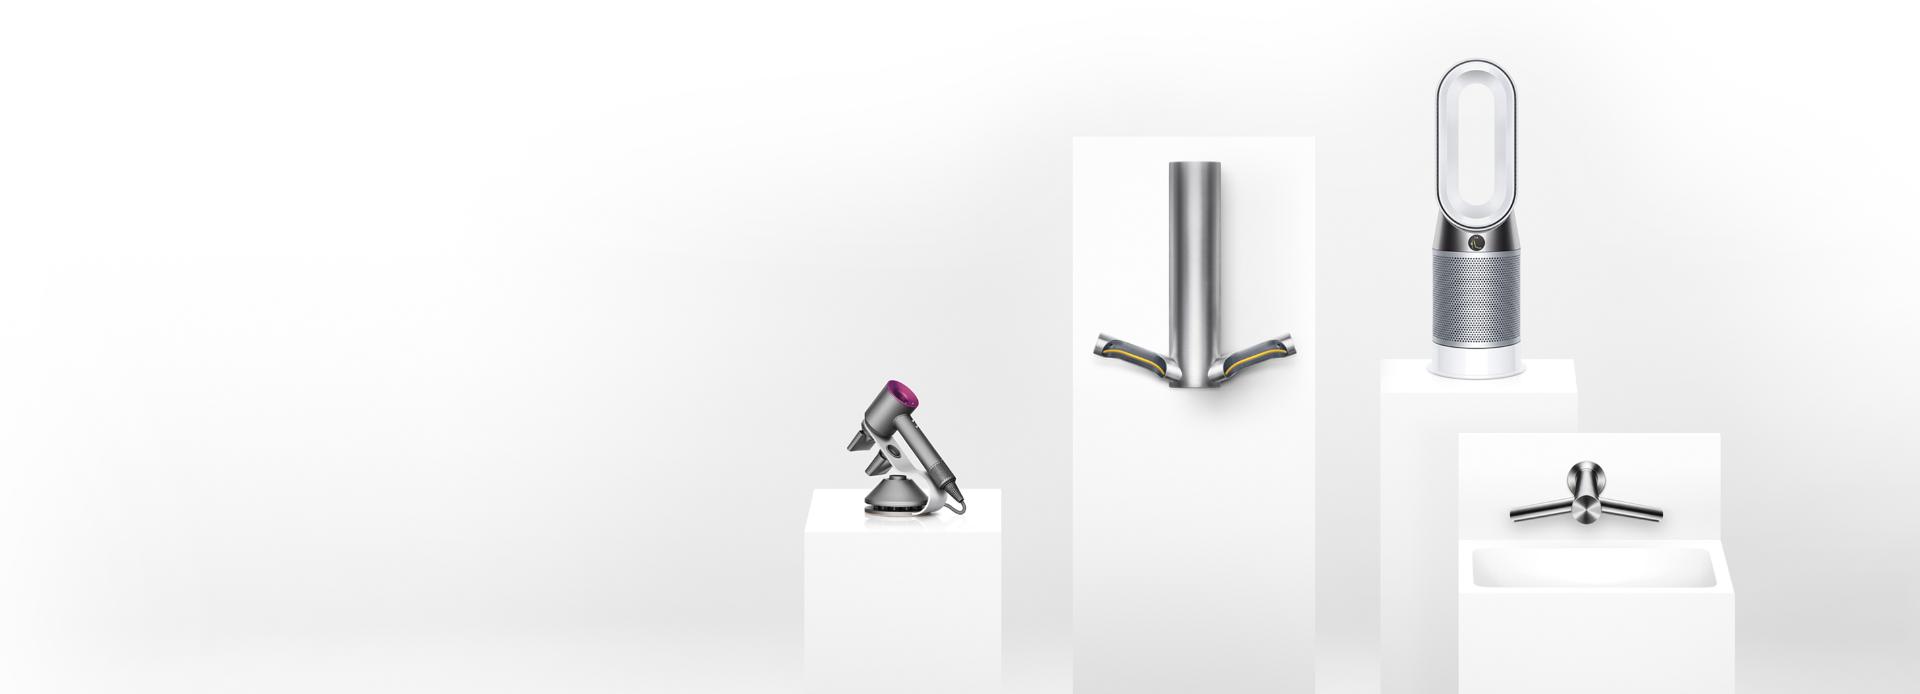 Photograph of the Dyson business range